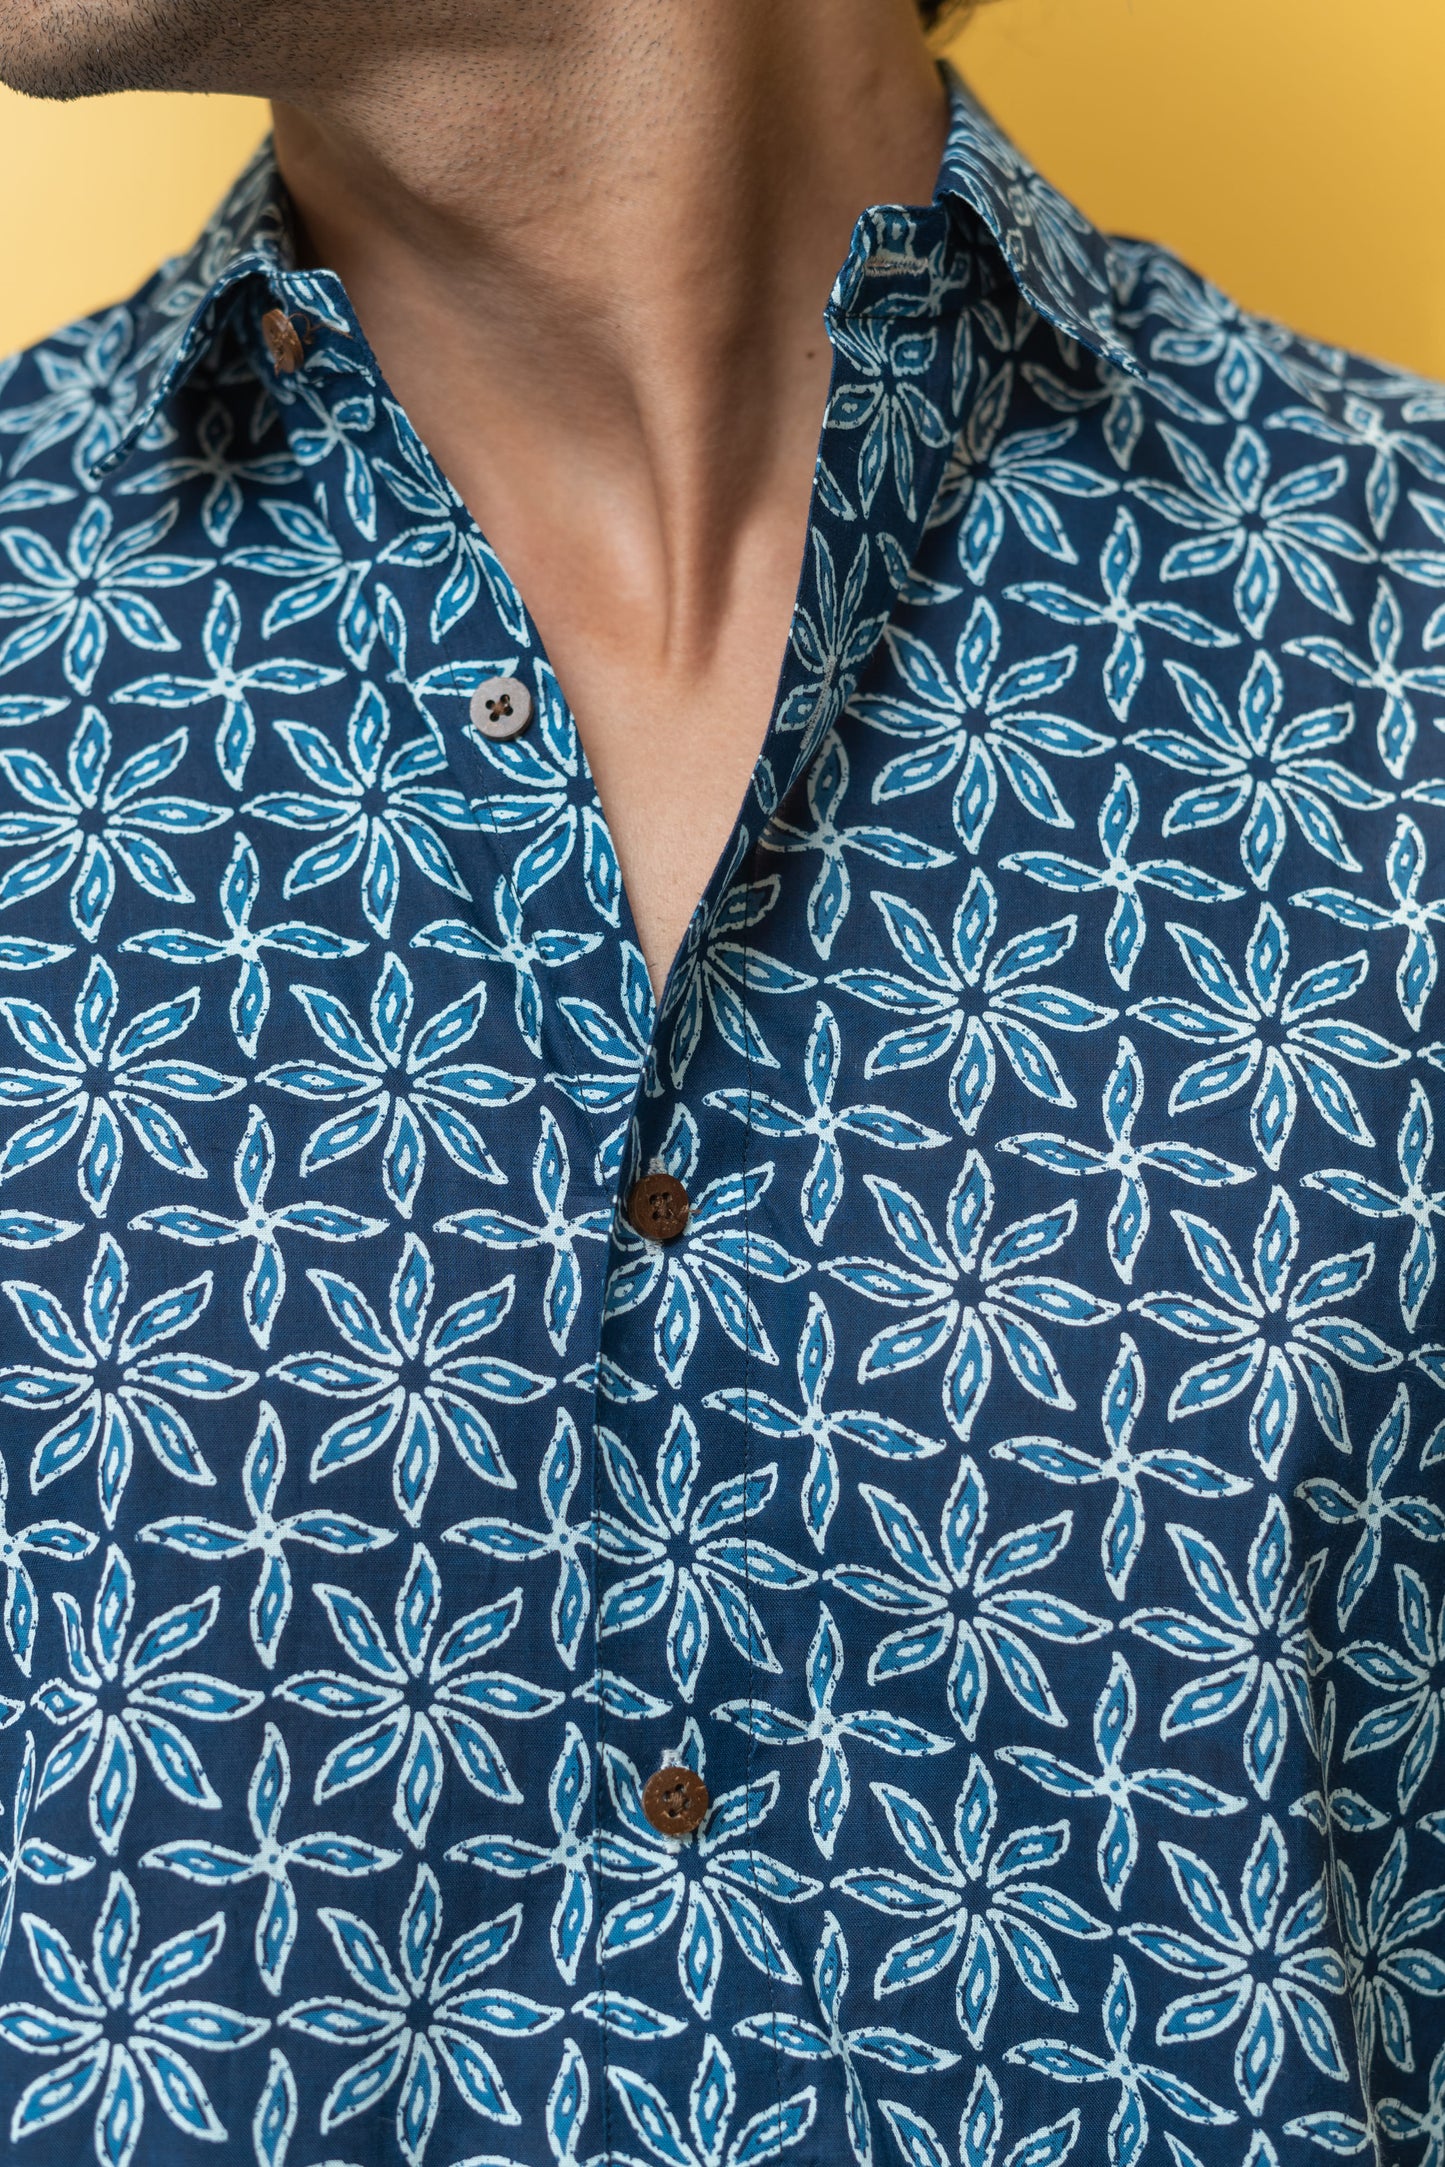 The Navy Blue All-Over Floral Print Half Sleeves Shirt